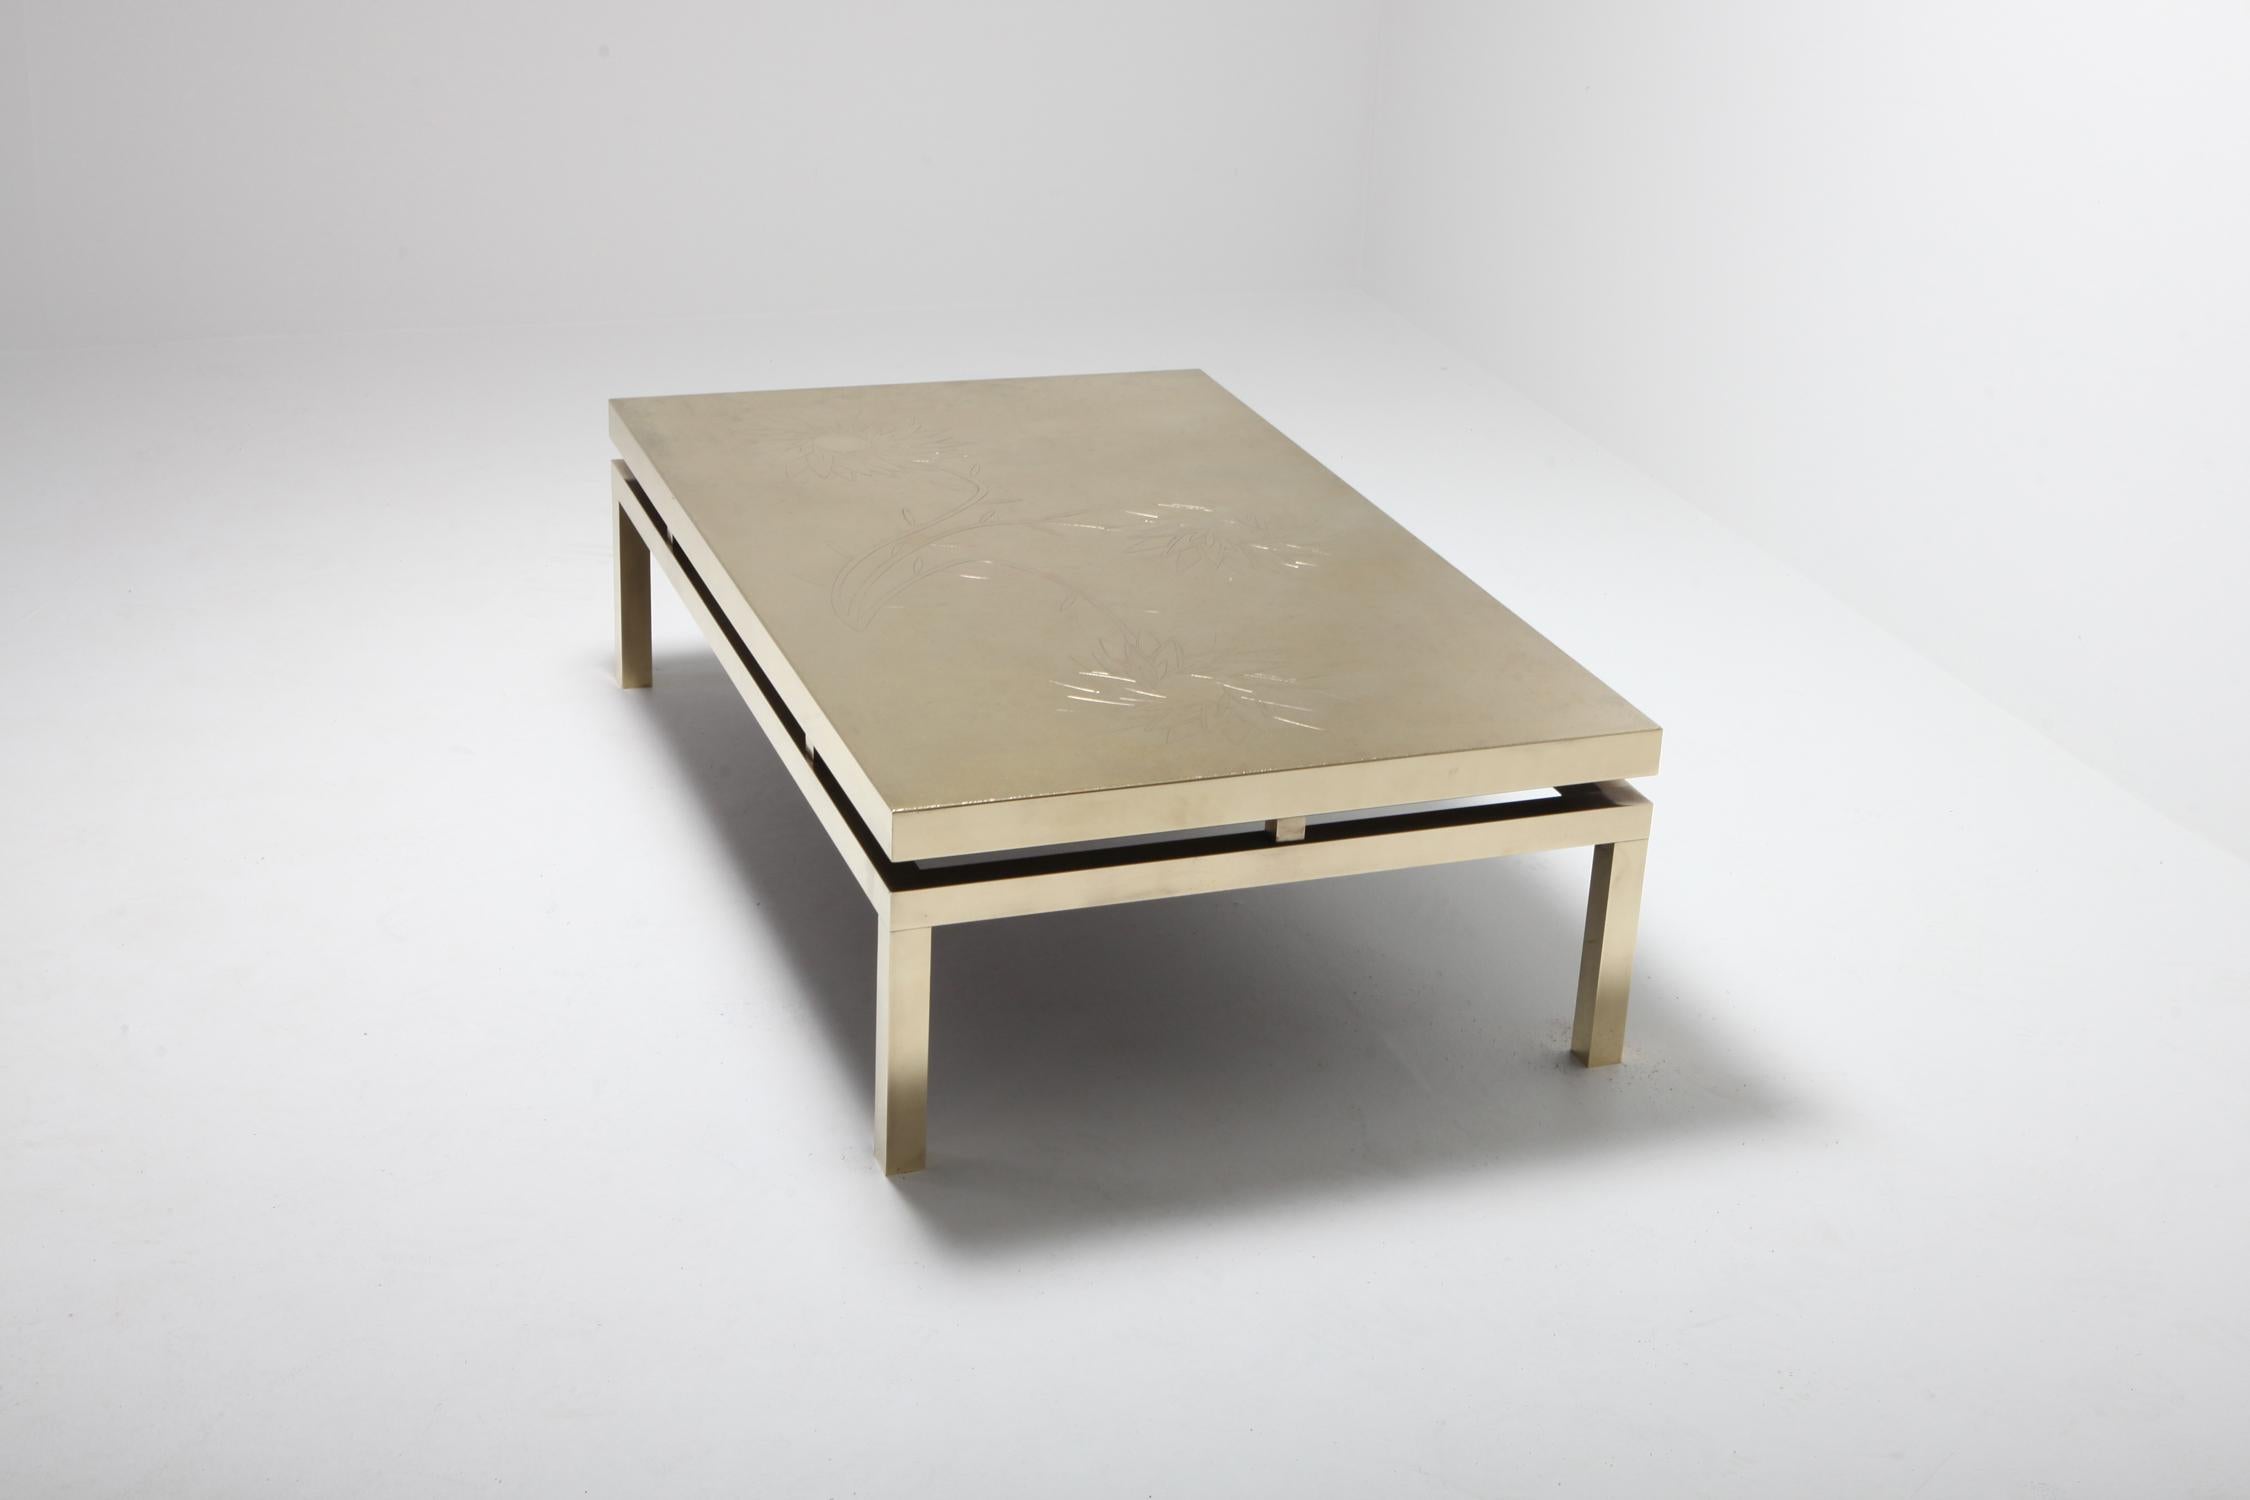 Late 20th Century Brass Etched Coffee Table by Willy Daro, International Style, Belgium, 1970s For Sale